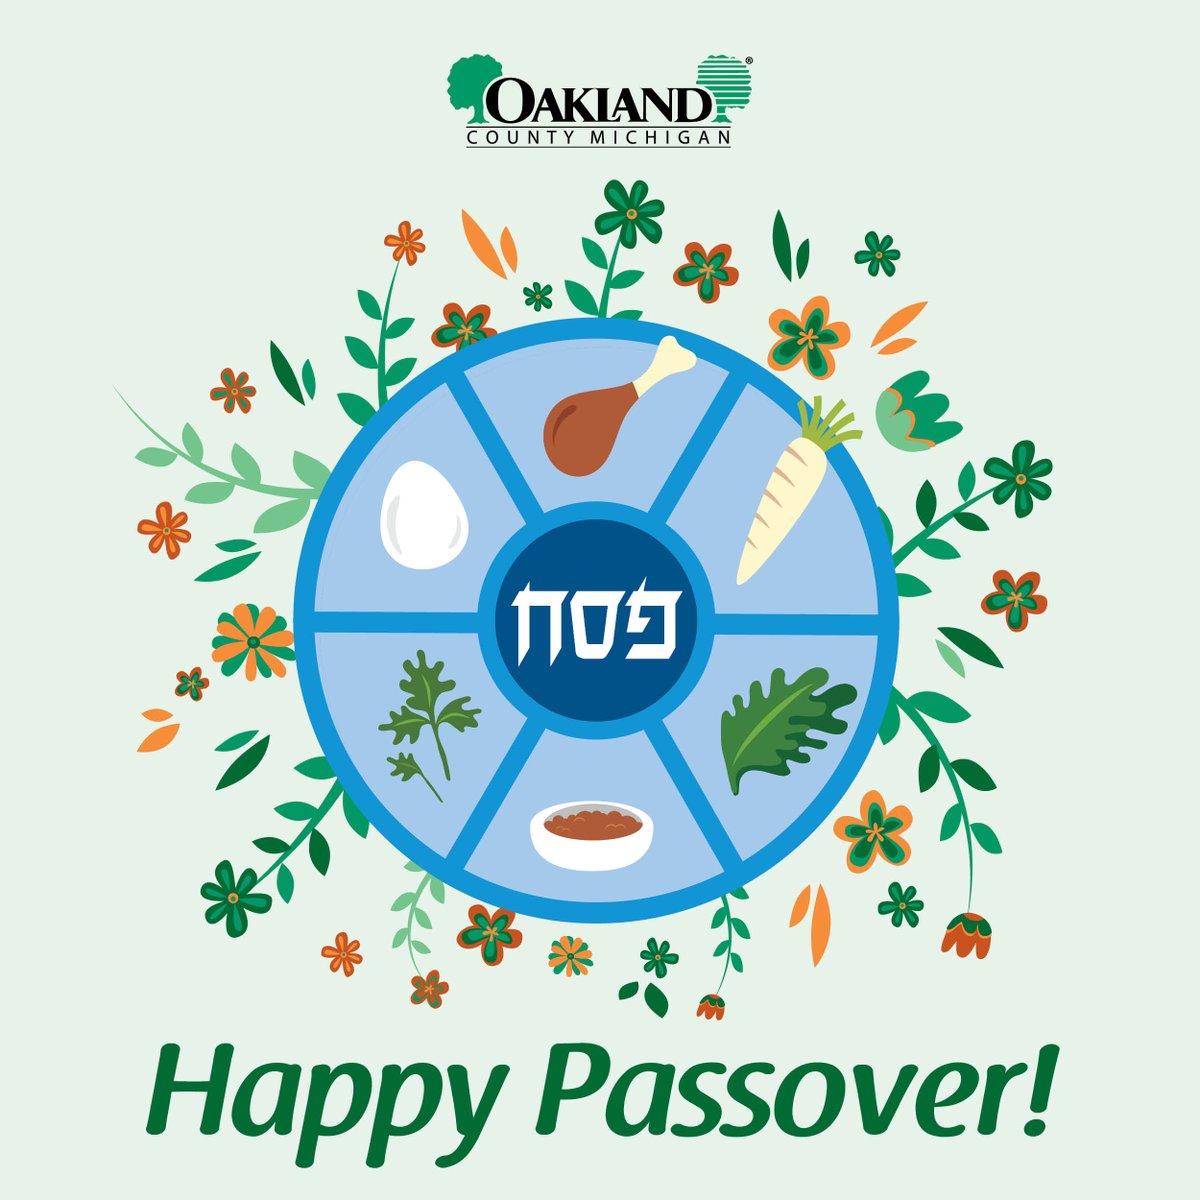 Chag sameach to all in #OaklandCounty observing #Passover. May this holiday bring you a joyous time with loved ones.